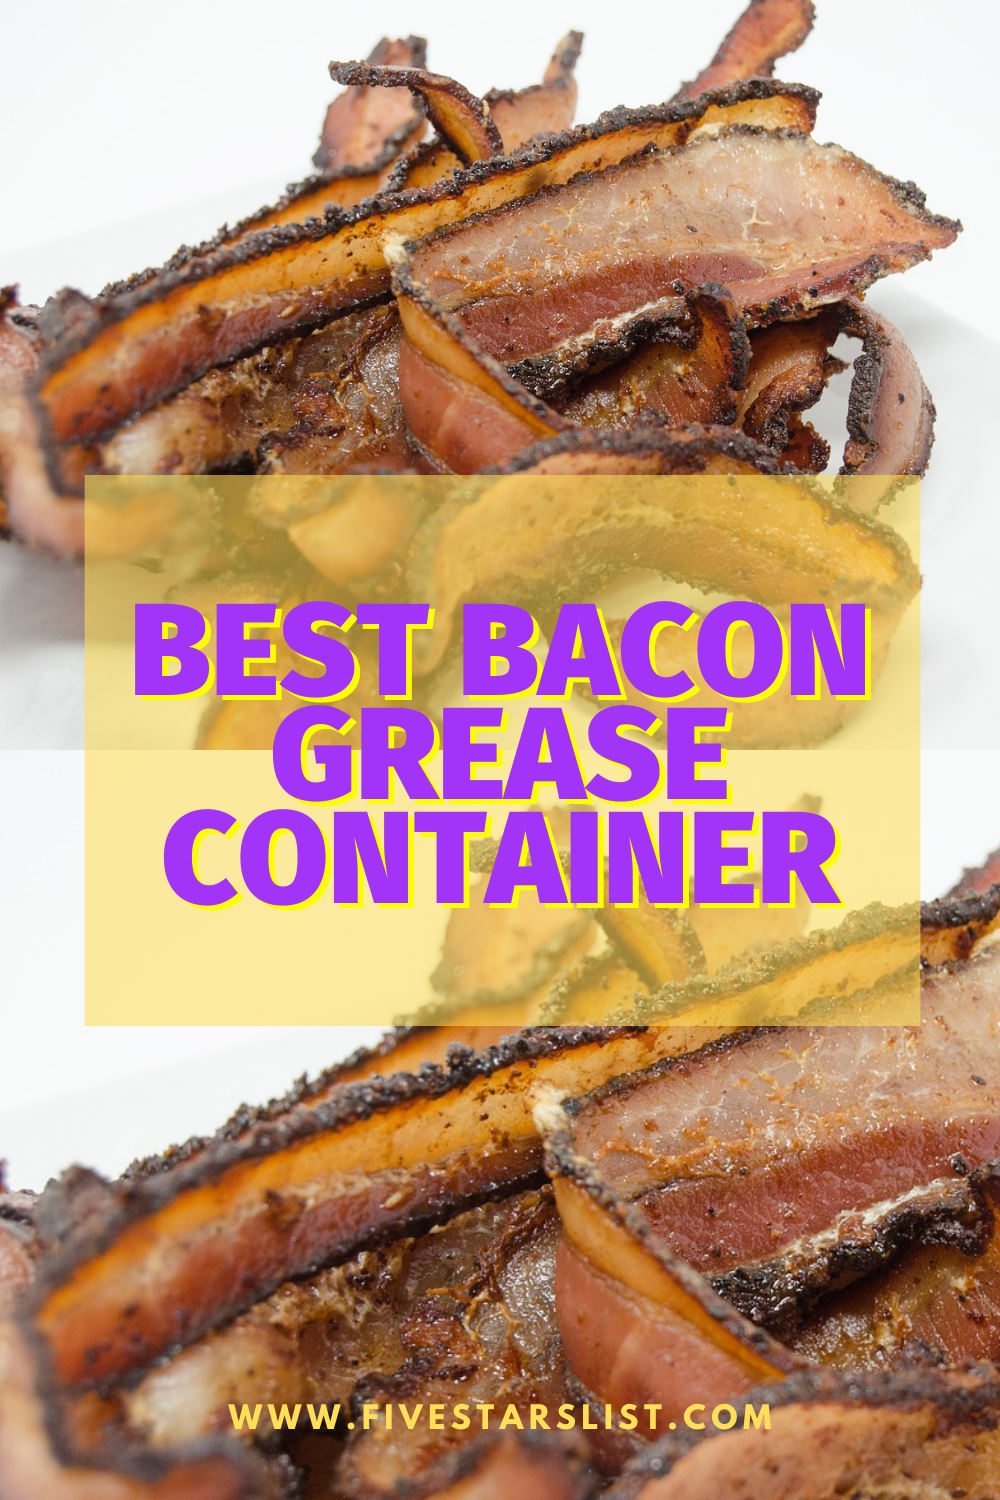 Best Bacon Grease Container